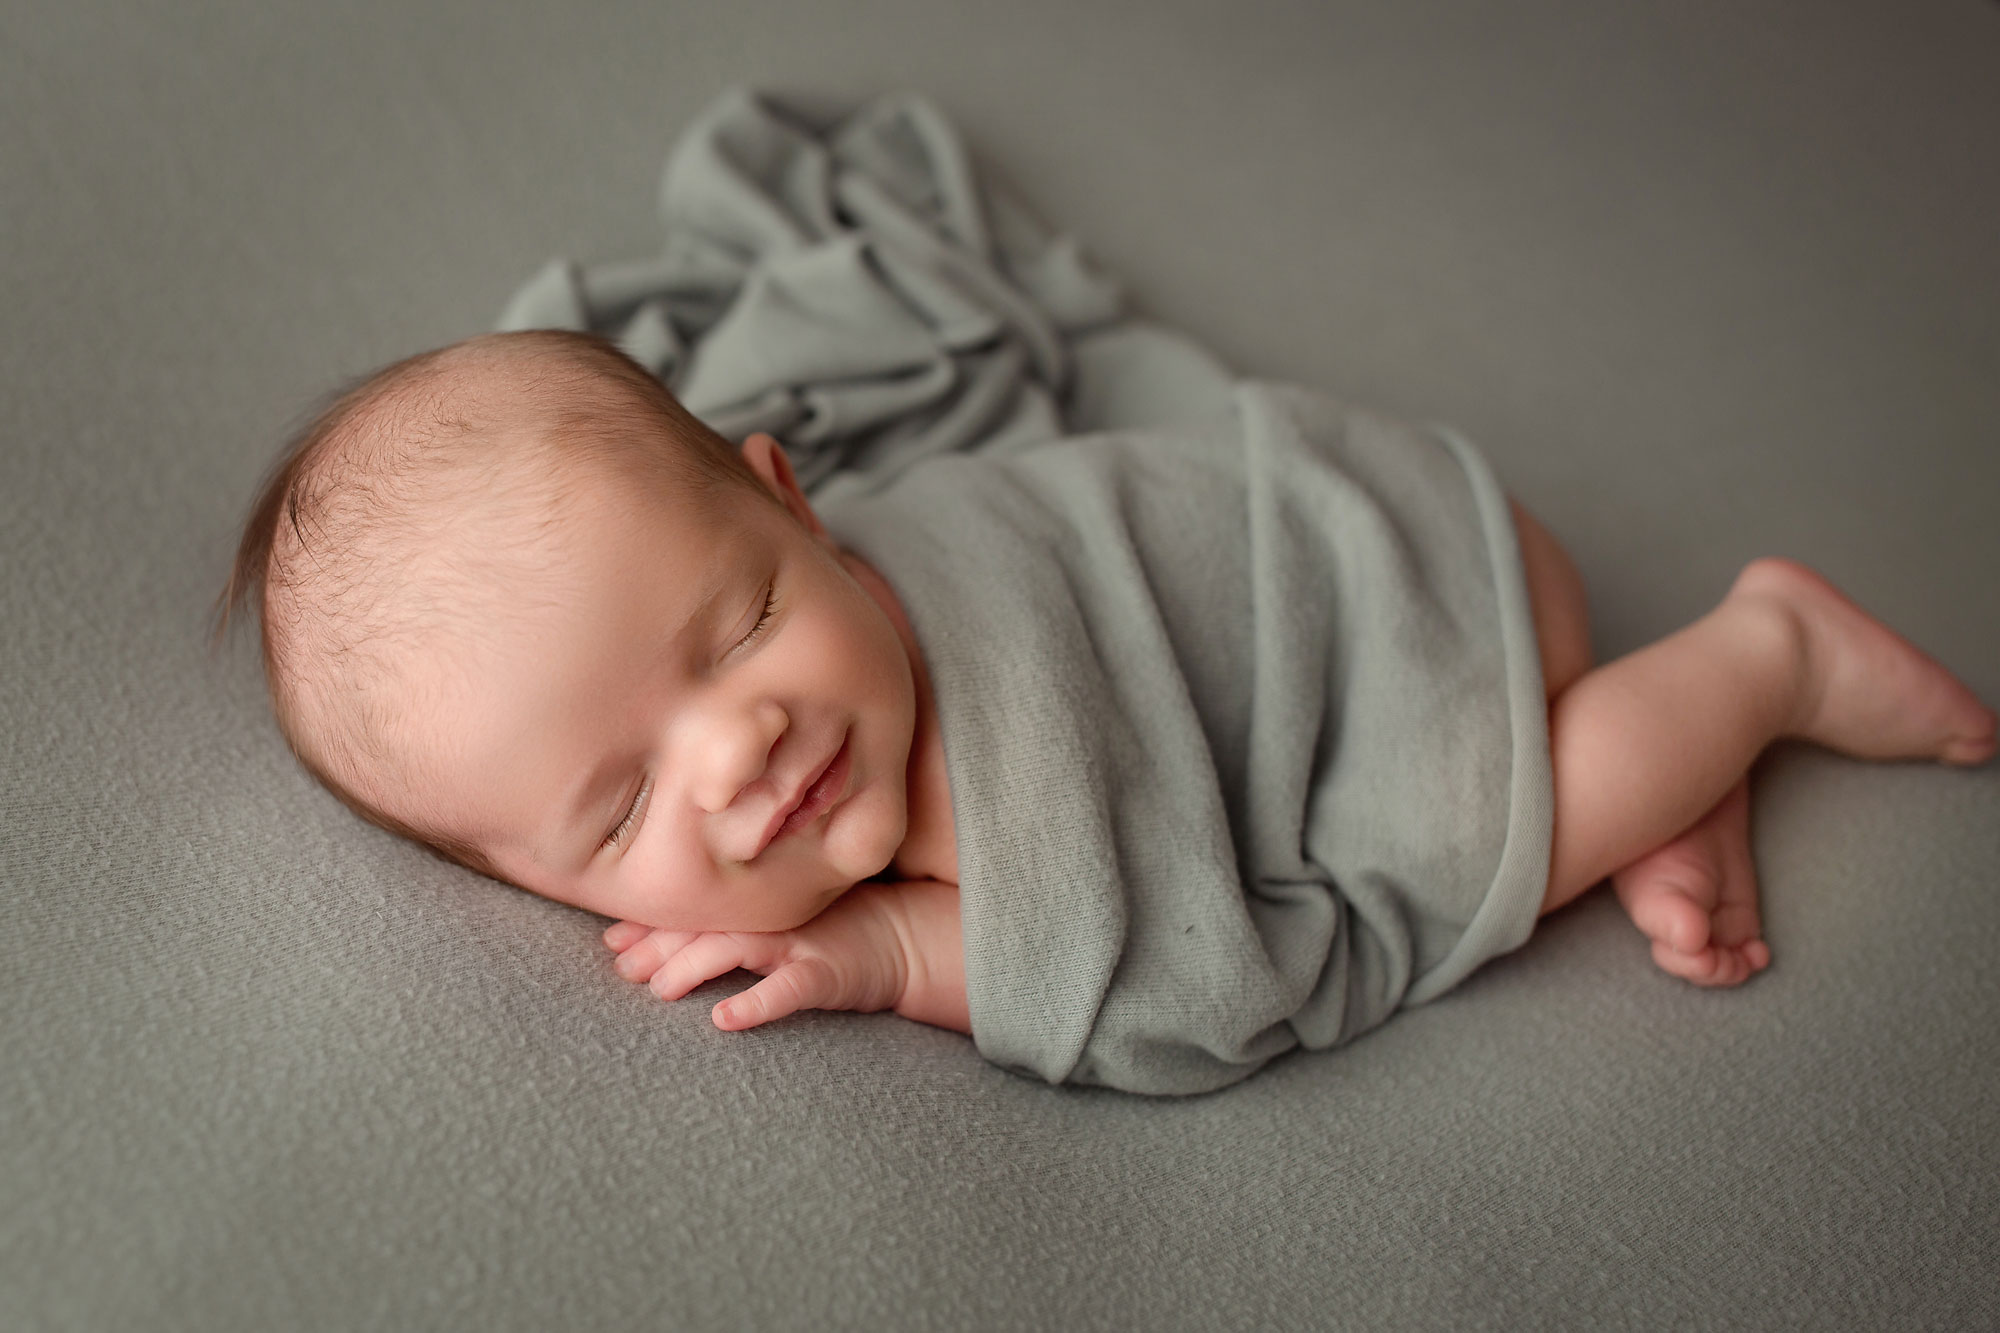 newborn baby photographer, baby asleep and smiling wrapped in gray blanket